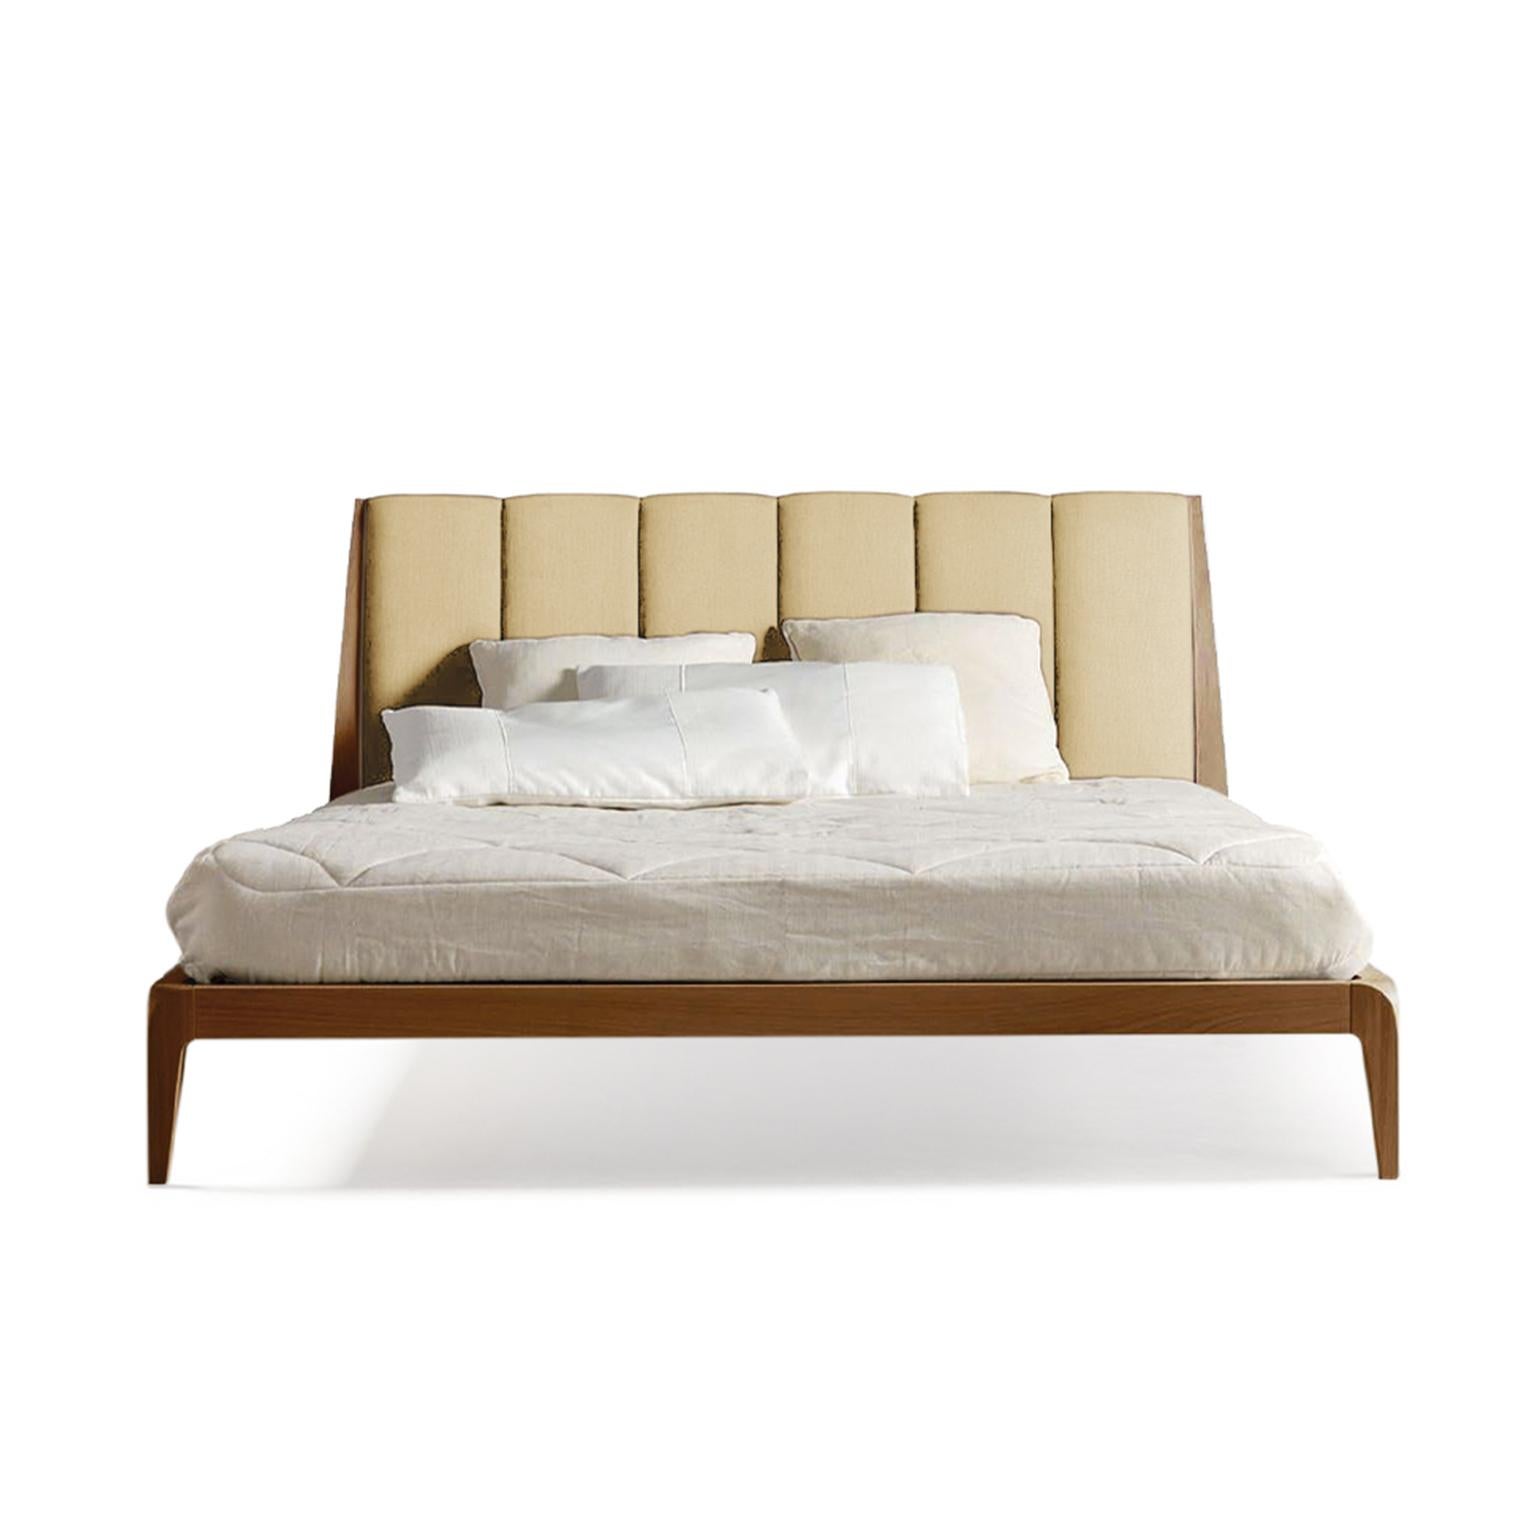 Verso Nord Solid Wood Bed, Walnut in Hand-Made Natural Finish, Contemporary For Sale 4